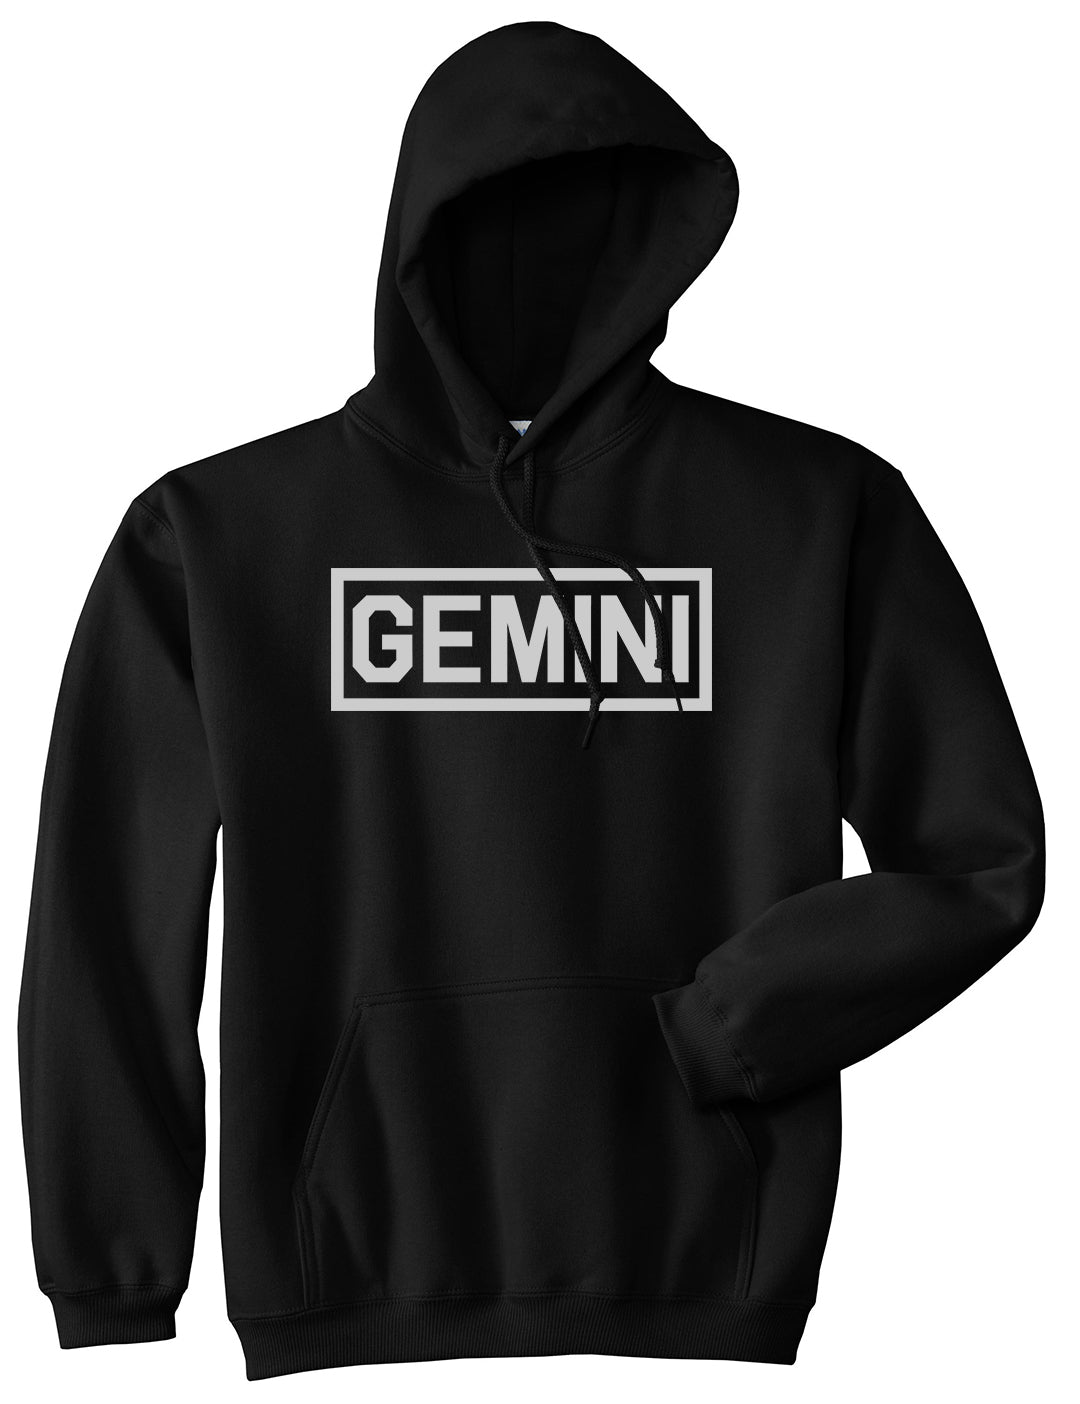 Gemini Horoscope Sign Mens Black Pullover Hoodie by KINGS OF NY